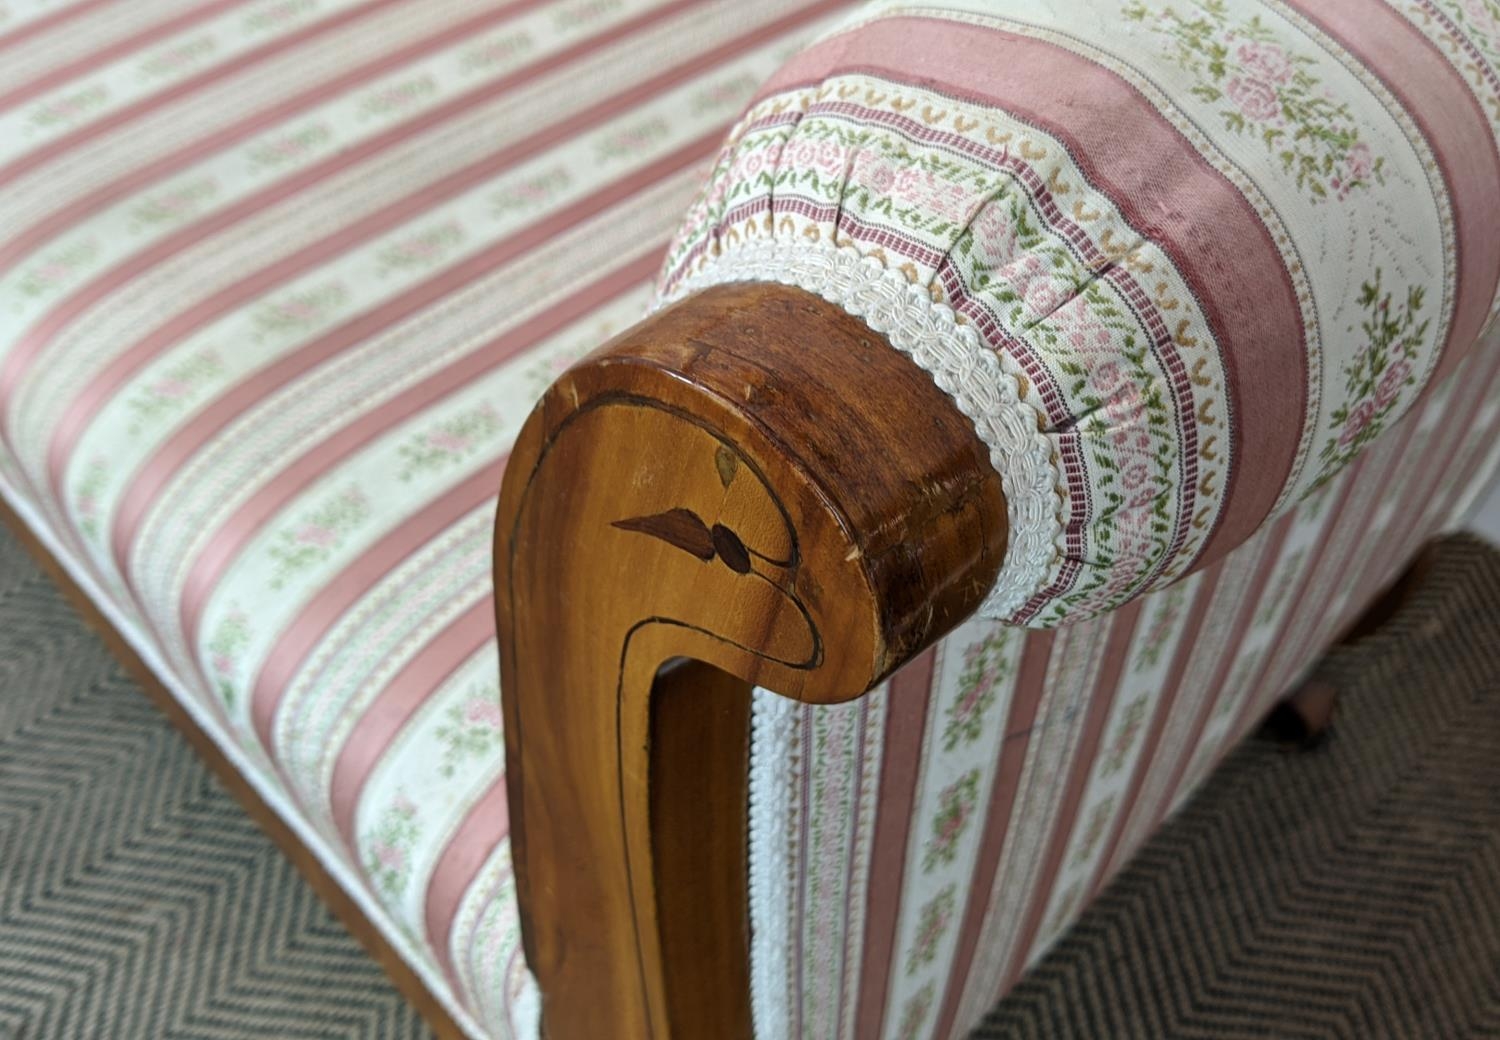 SOFA, Biedermeier cherrywood and line inlaid with pink striped upholstery, 104cm H x 168cm x 68cm. - Image 12 of 24